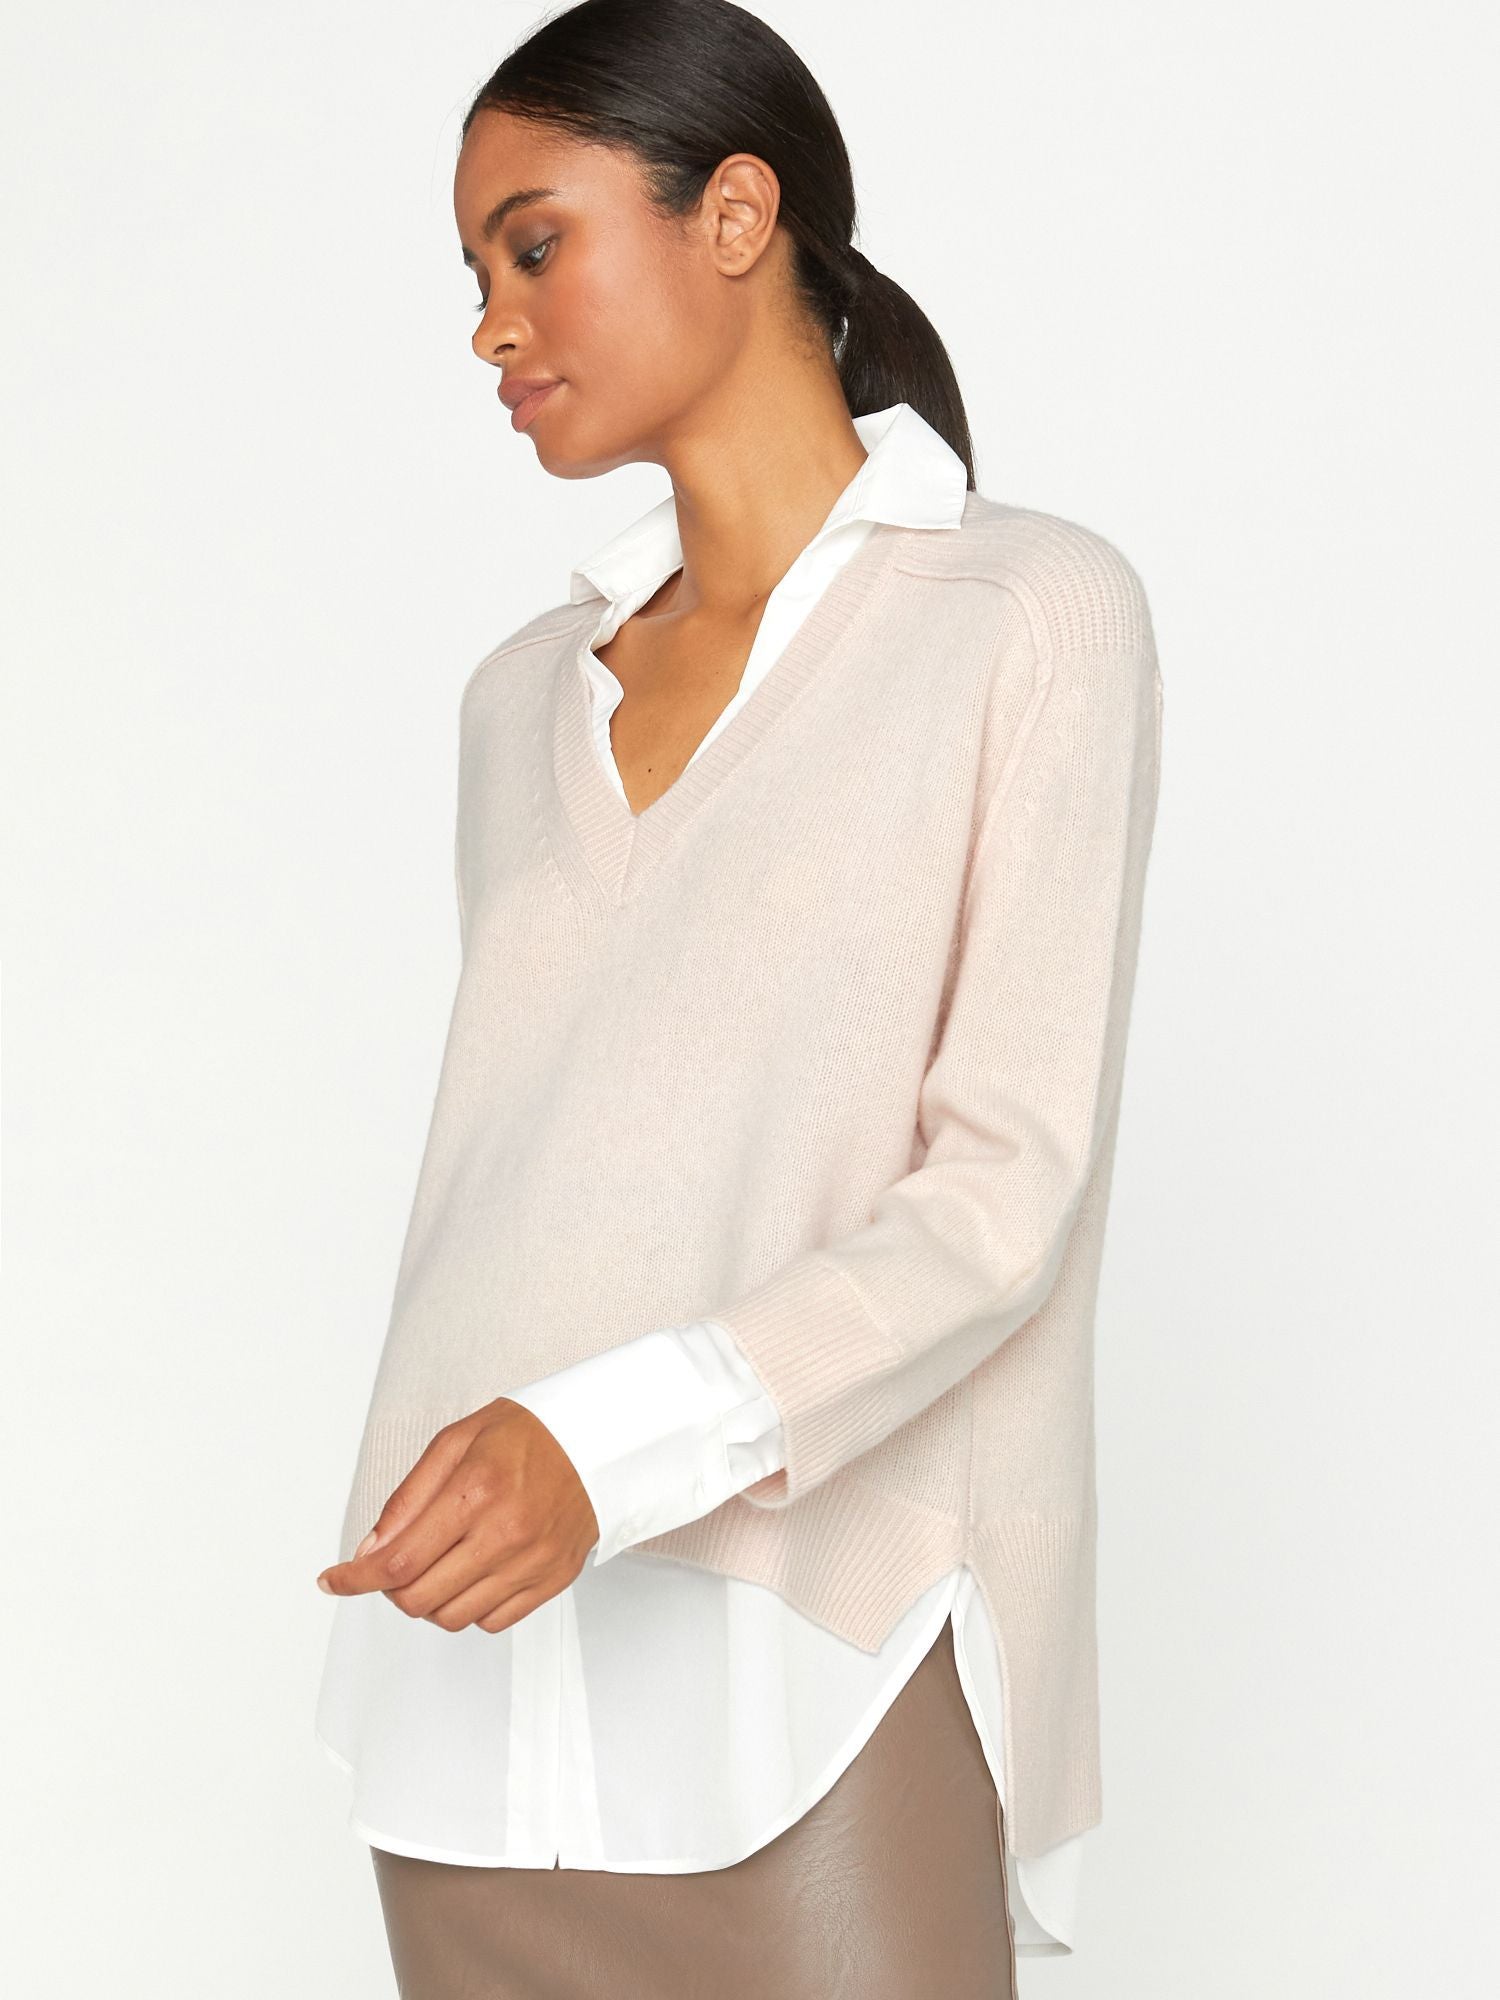 The Looker Layered V-Neck